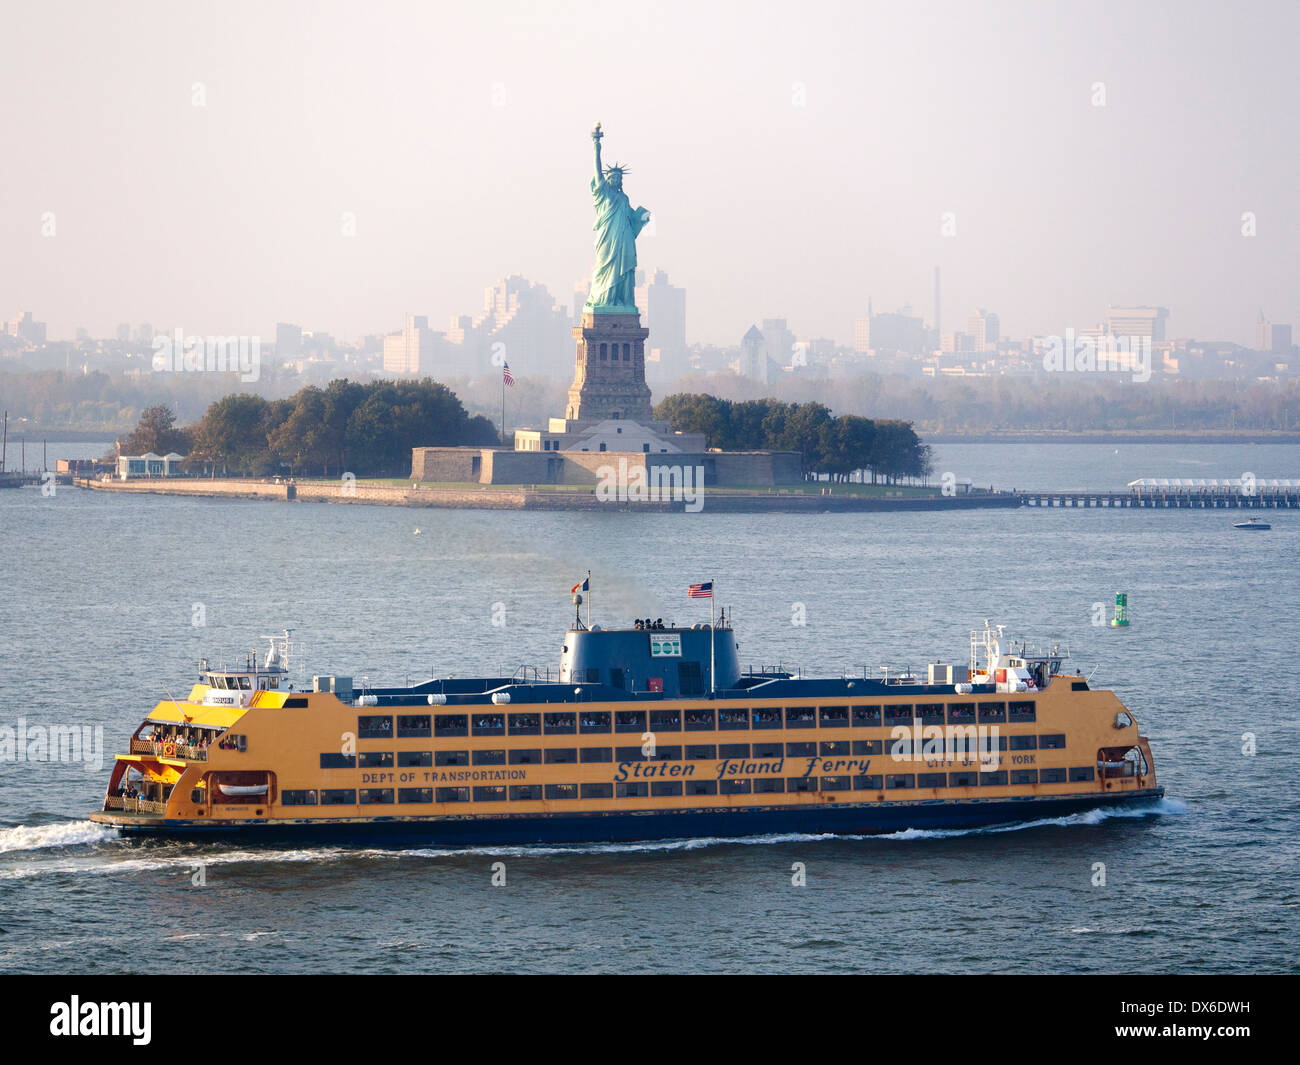 A Staten Island ferry passing the Statue of Liberty in New York Stock Photo